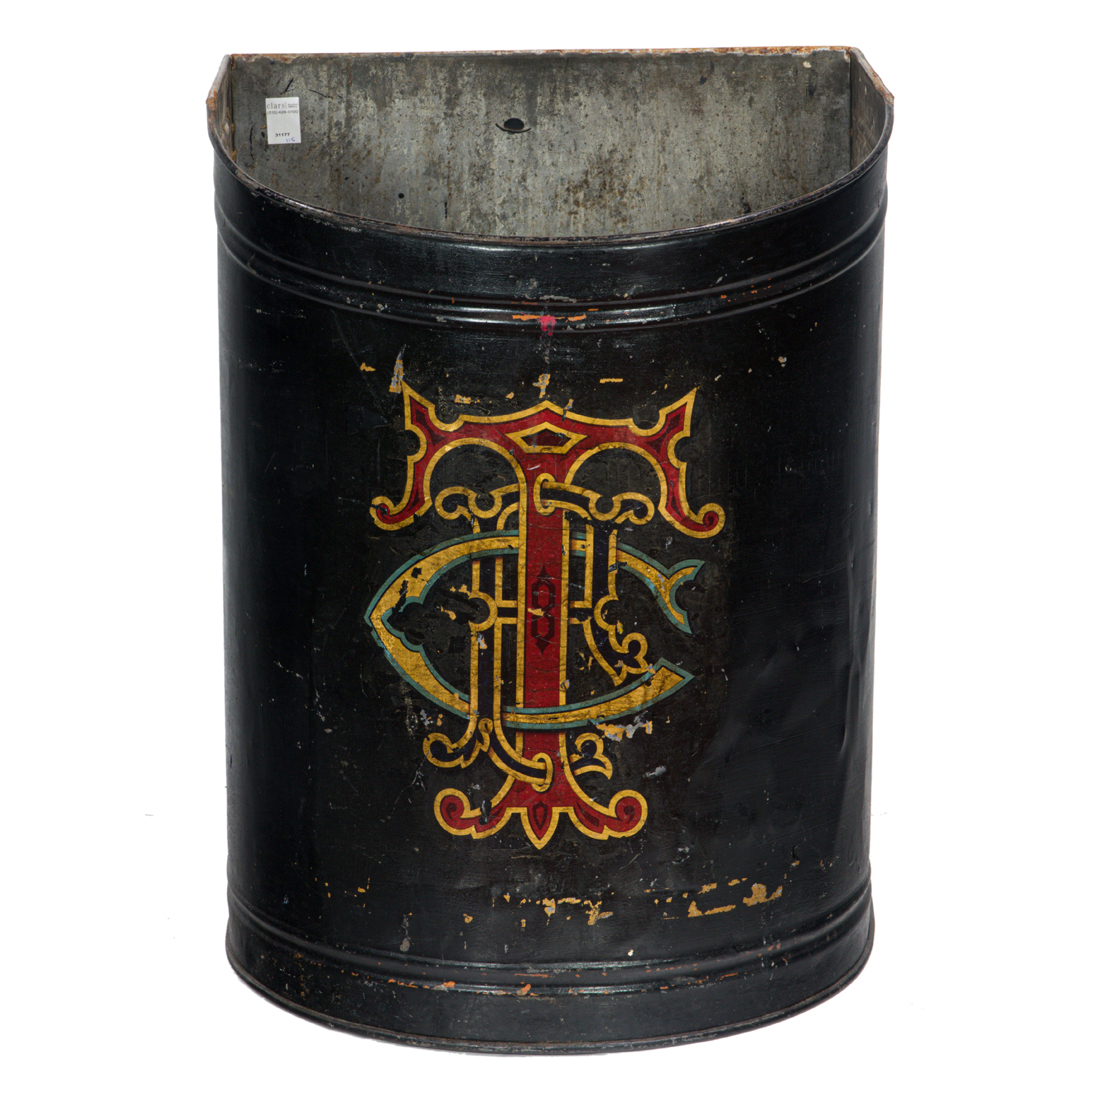 LARGE TOLE DECORATED FIRE BUCKET Large